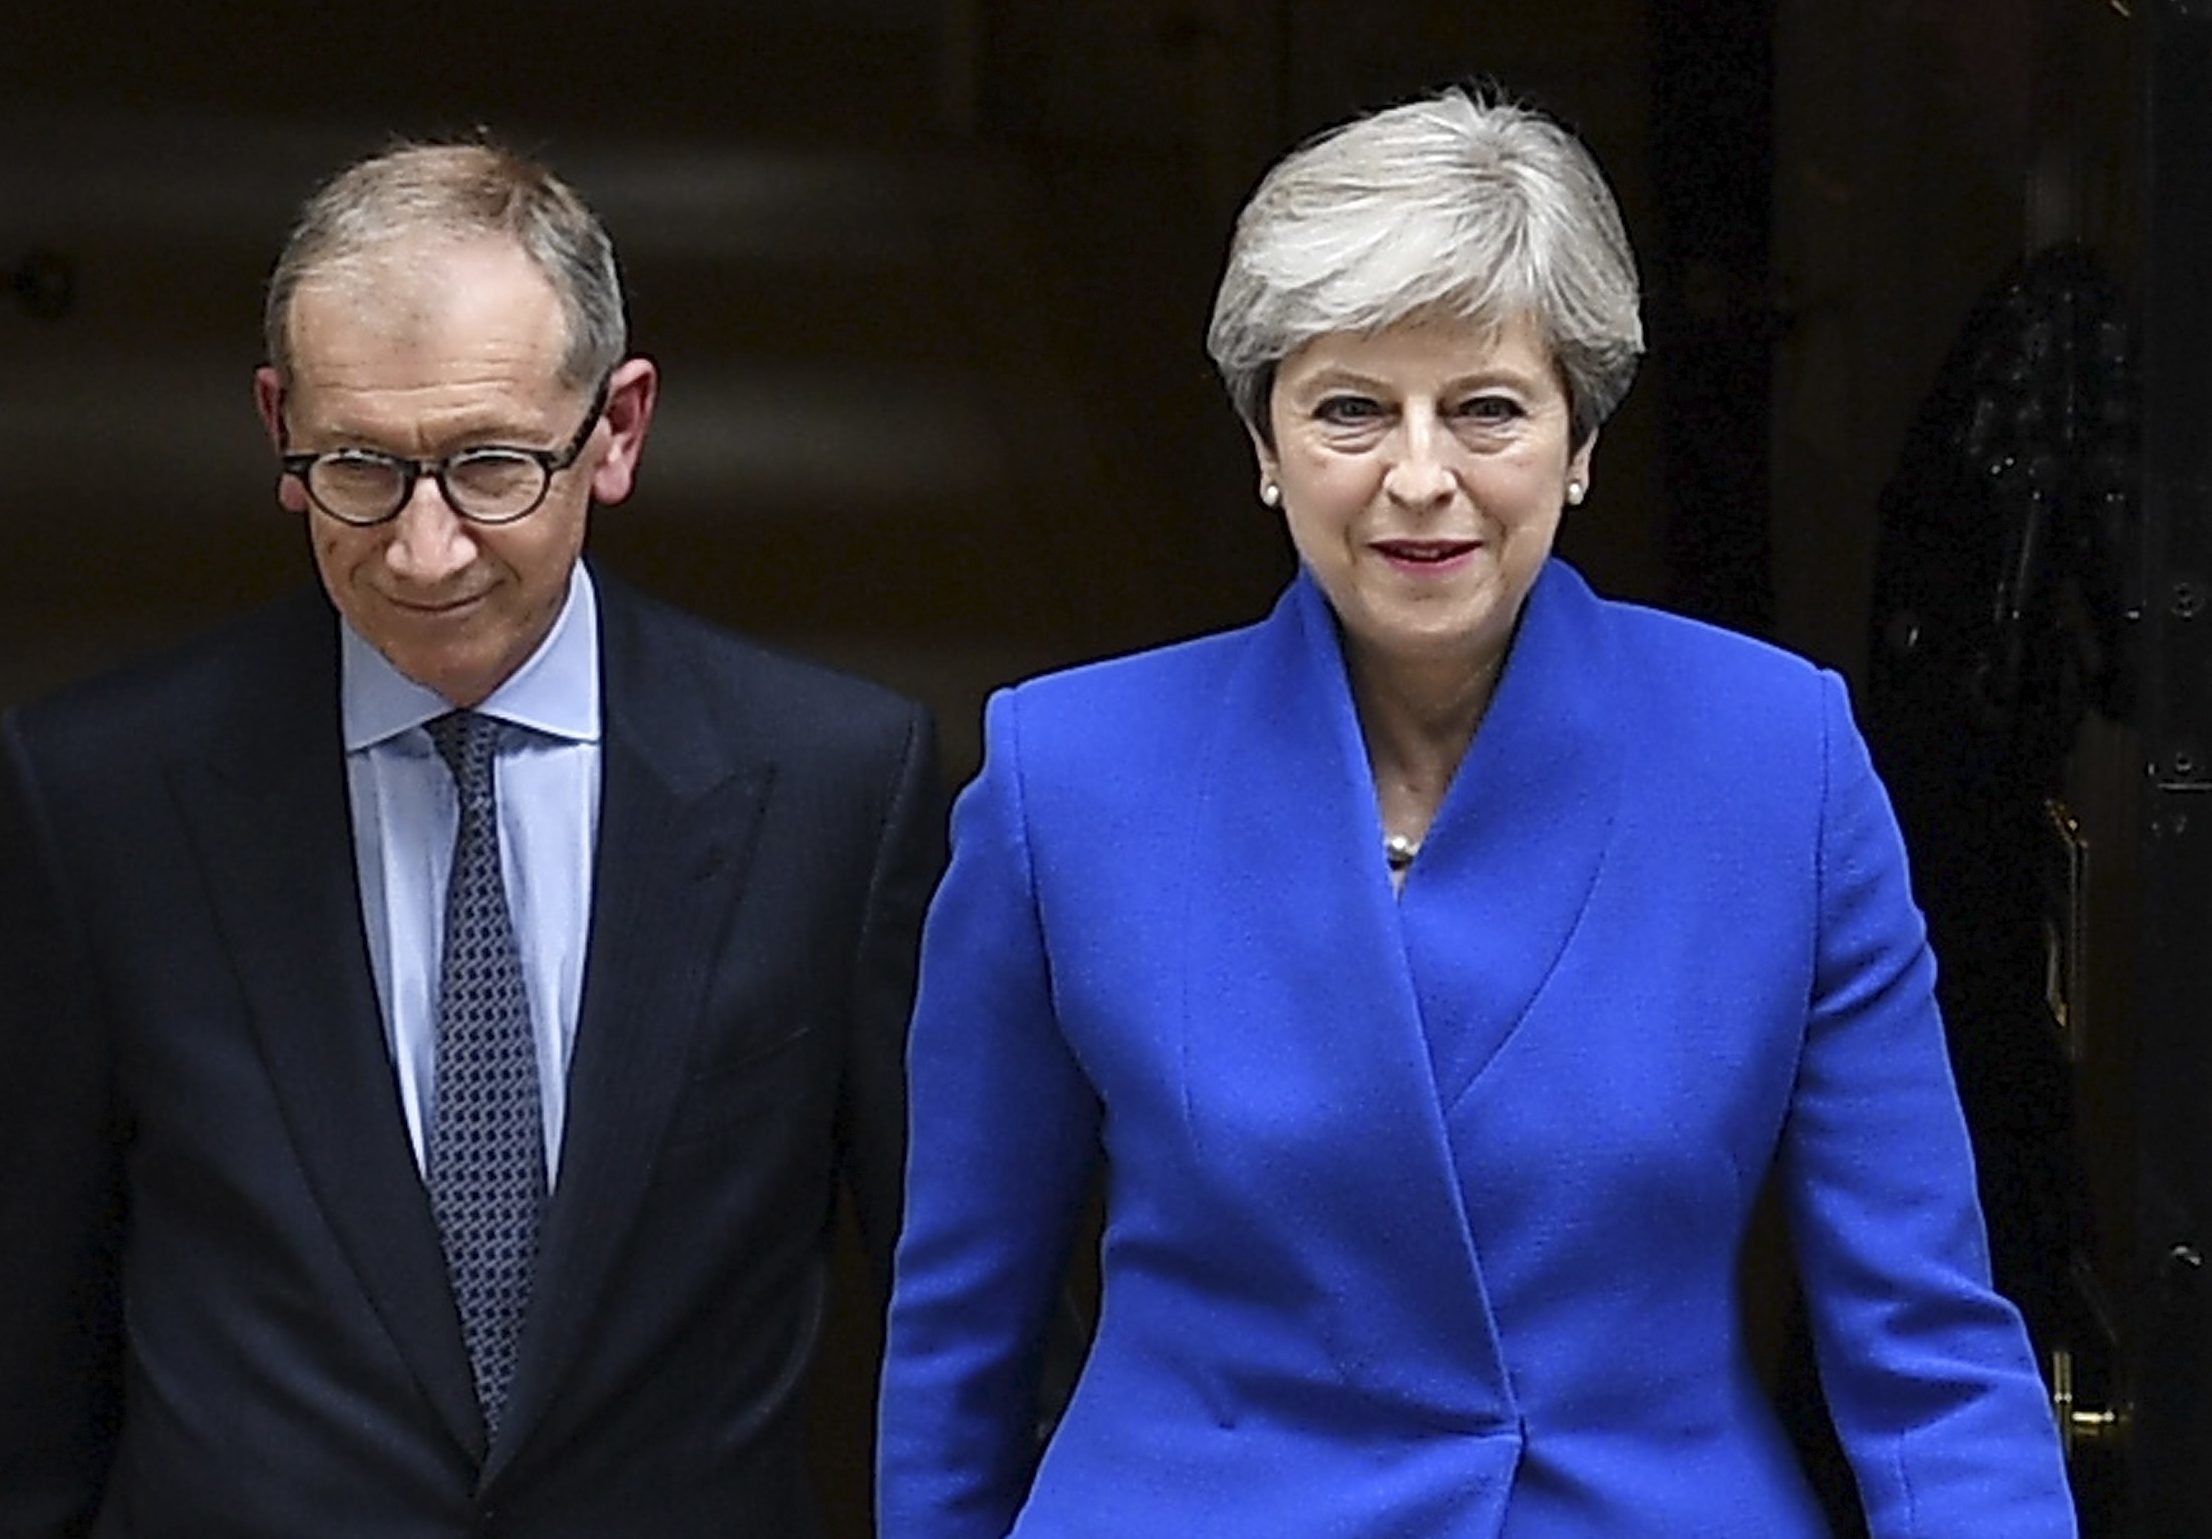 Prime Minister Theresa May leaves Downing Street with her husband Philip (Leon Neal/Getty Images)